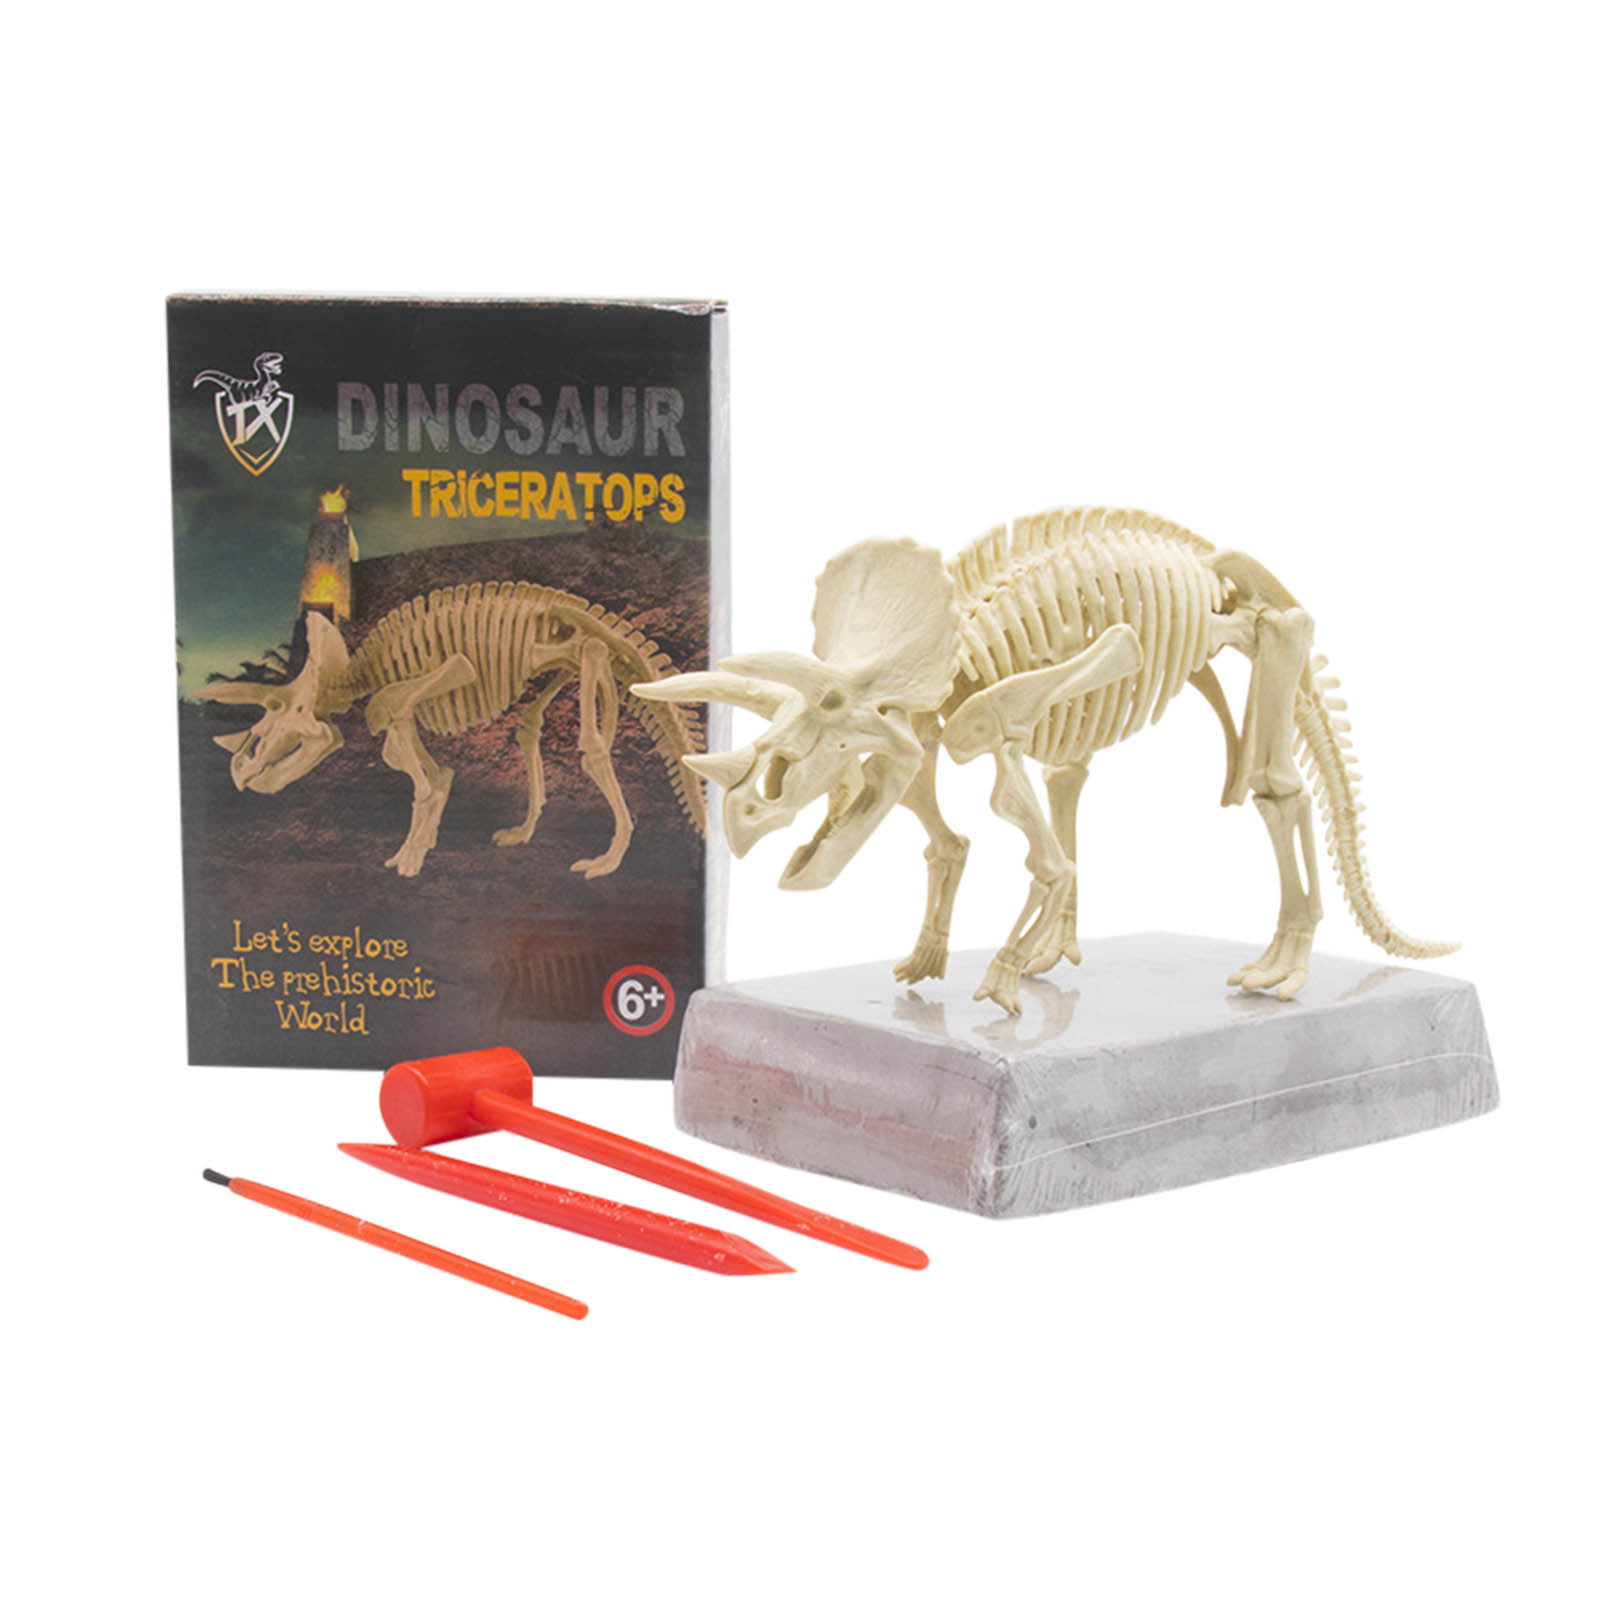 Dinosaur Fossil Digging Game Kit Kids Learning Toy Educational Activity Set 